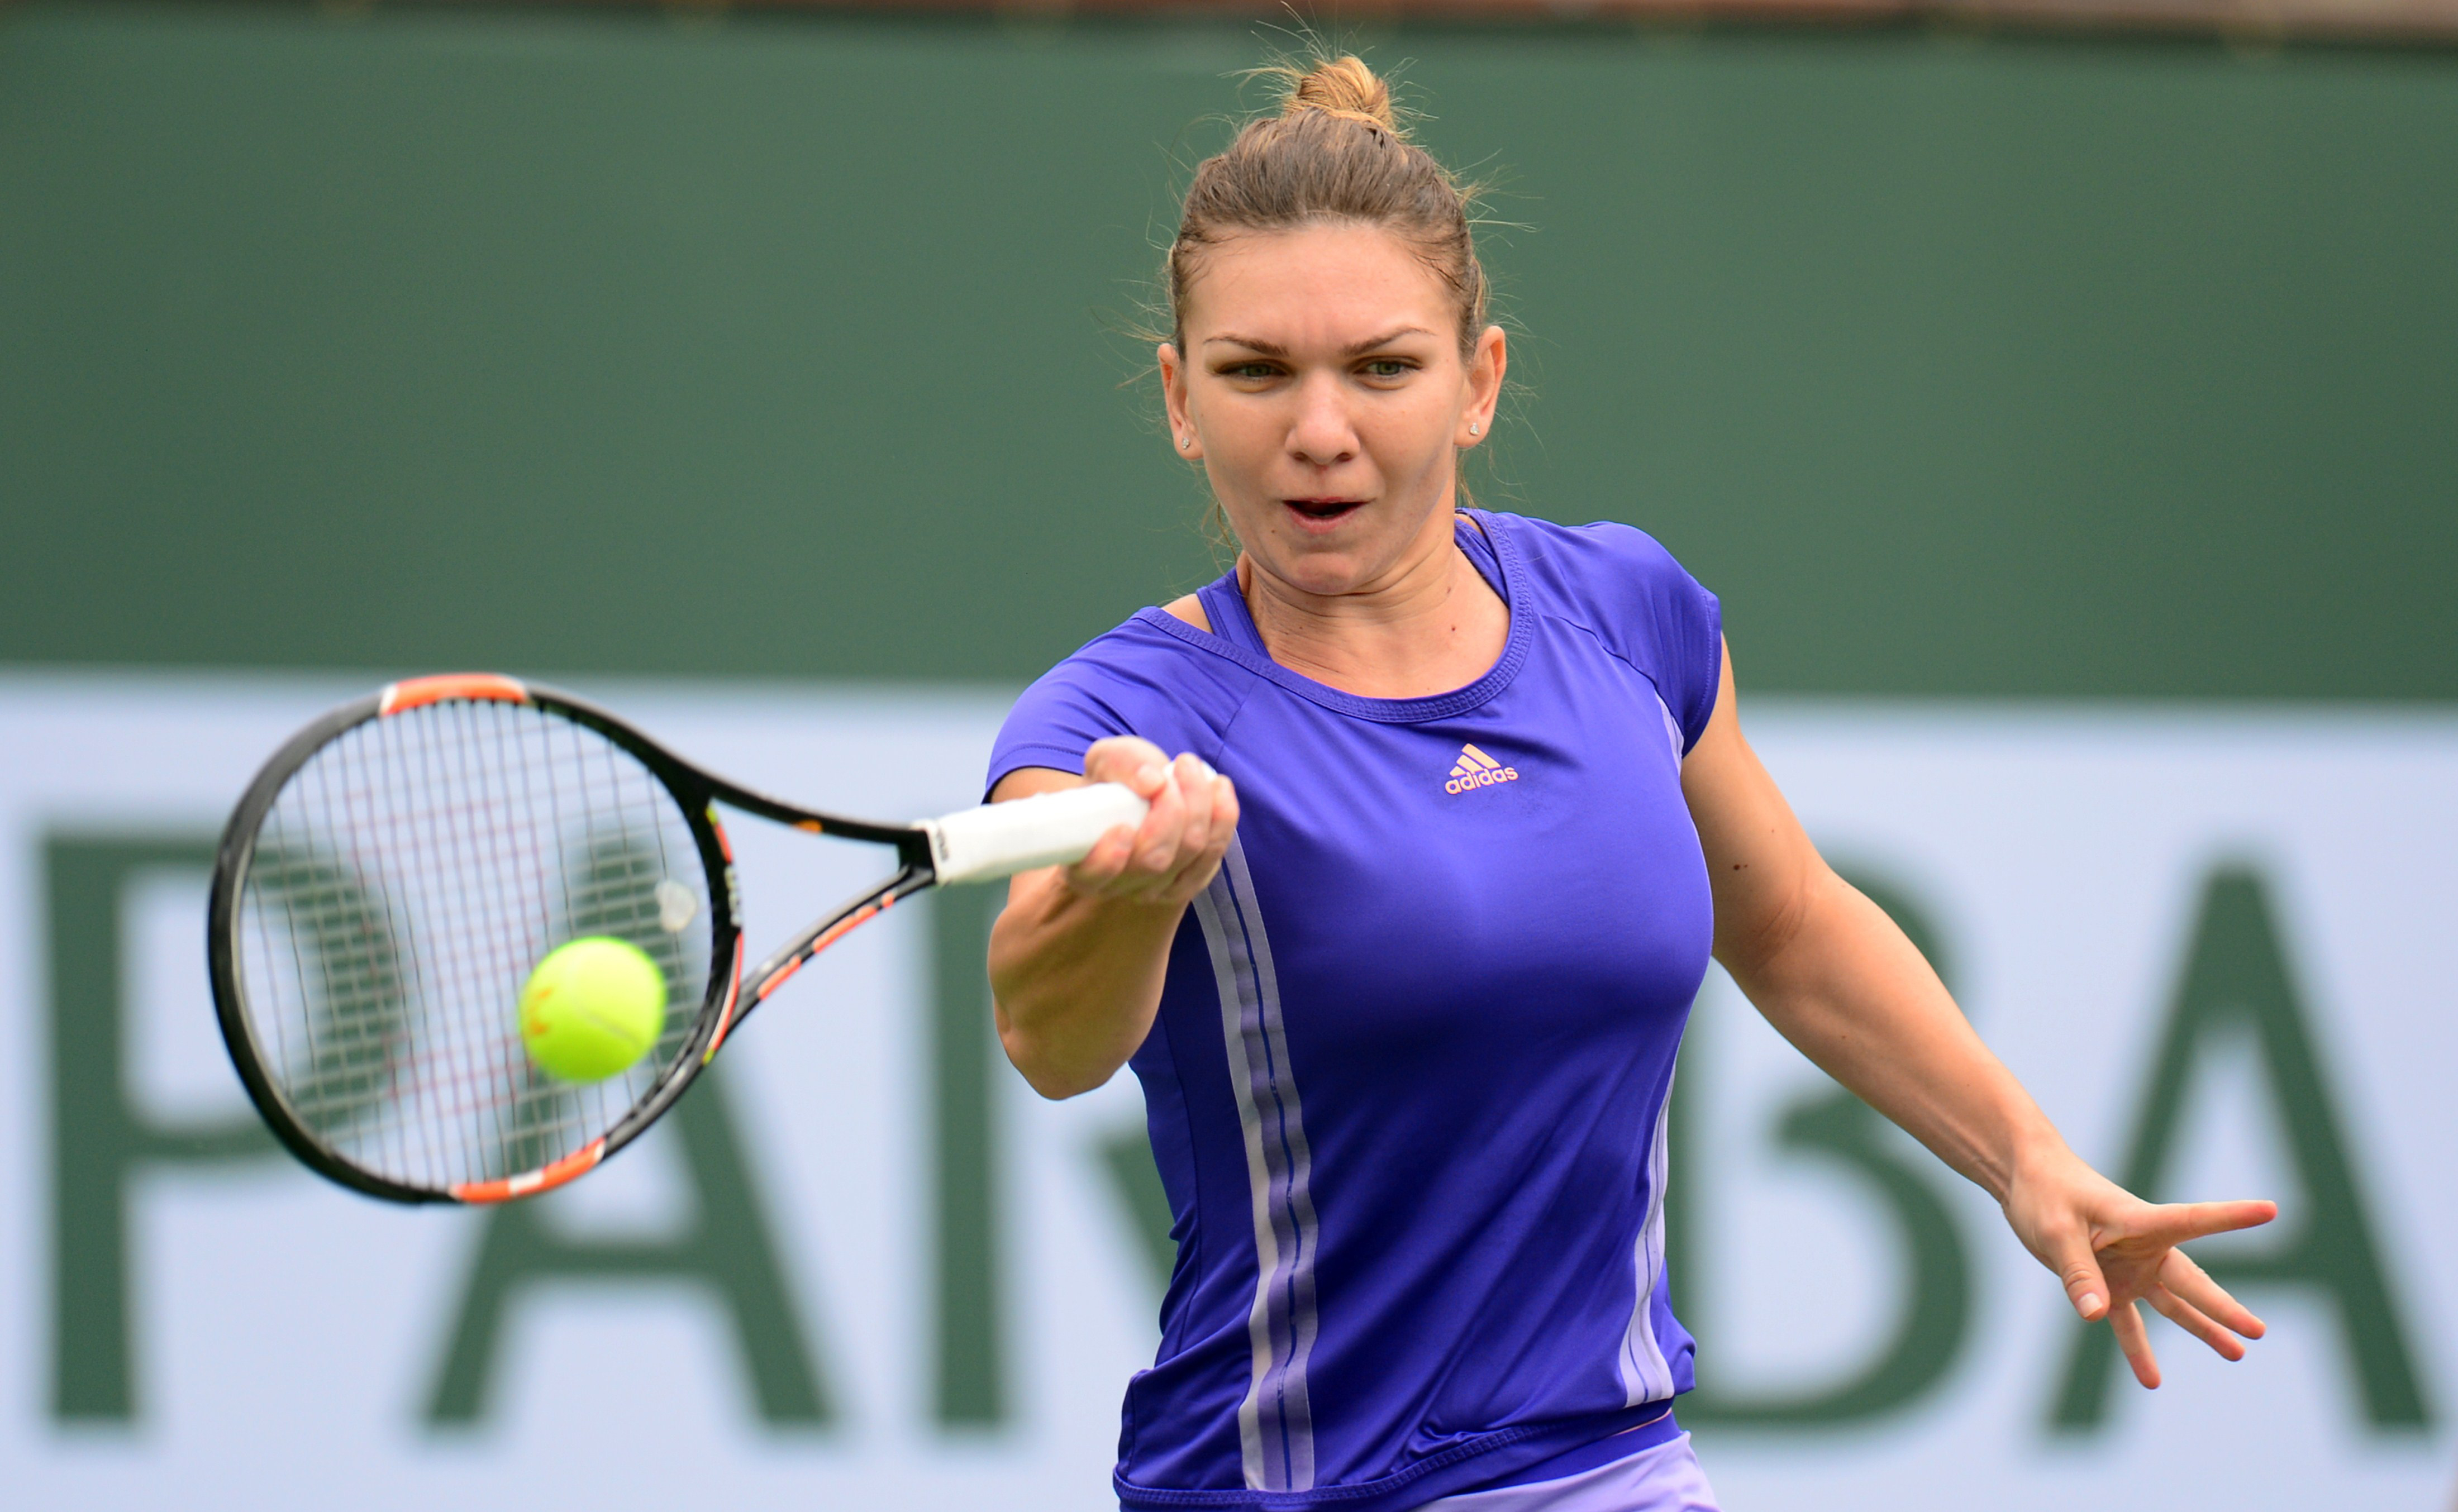 Simona Halep hits a forehand return to Jelena Jankovic during the women's final of the BNP Paribas Open In Indian Wells on Sunday. (credit: Frederic J. Brown/AFP/Getty Images)